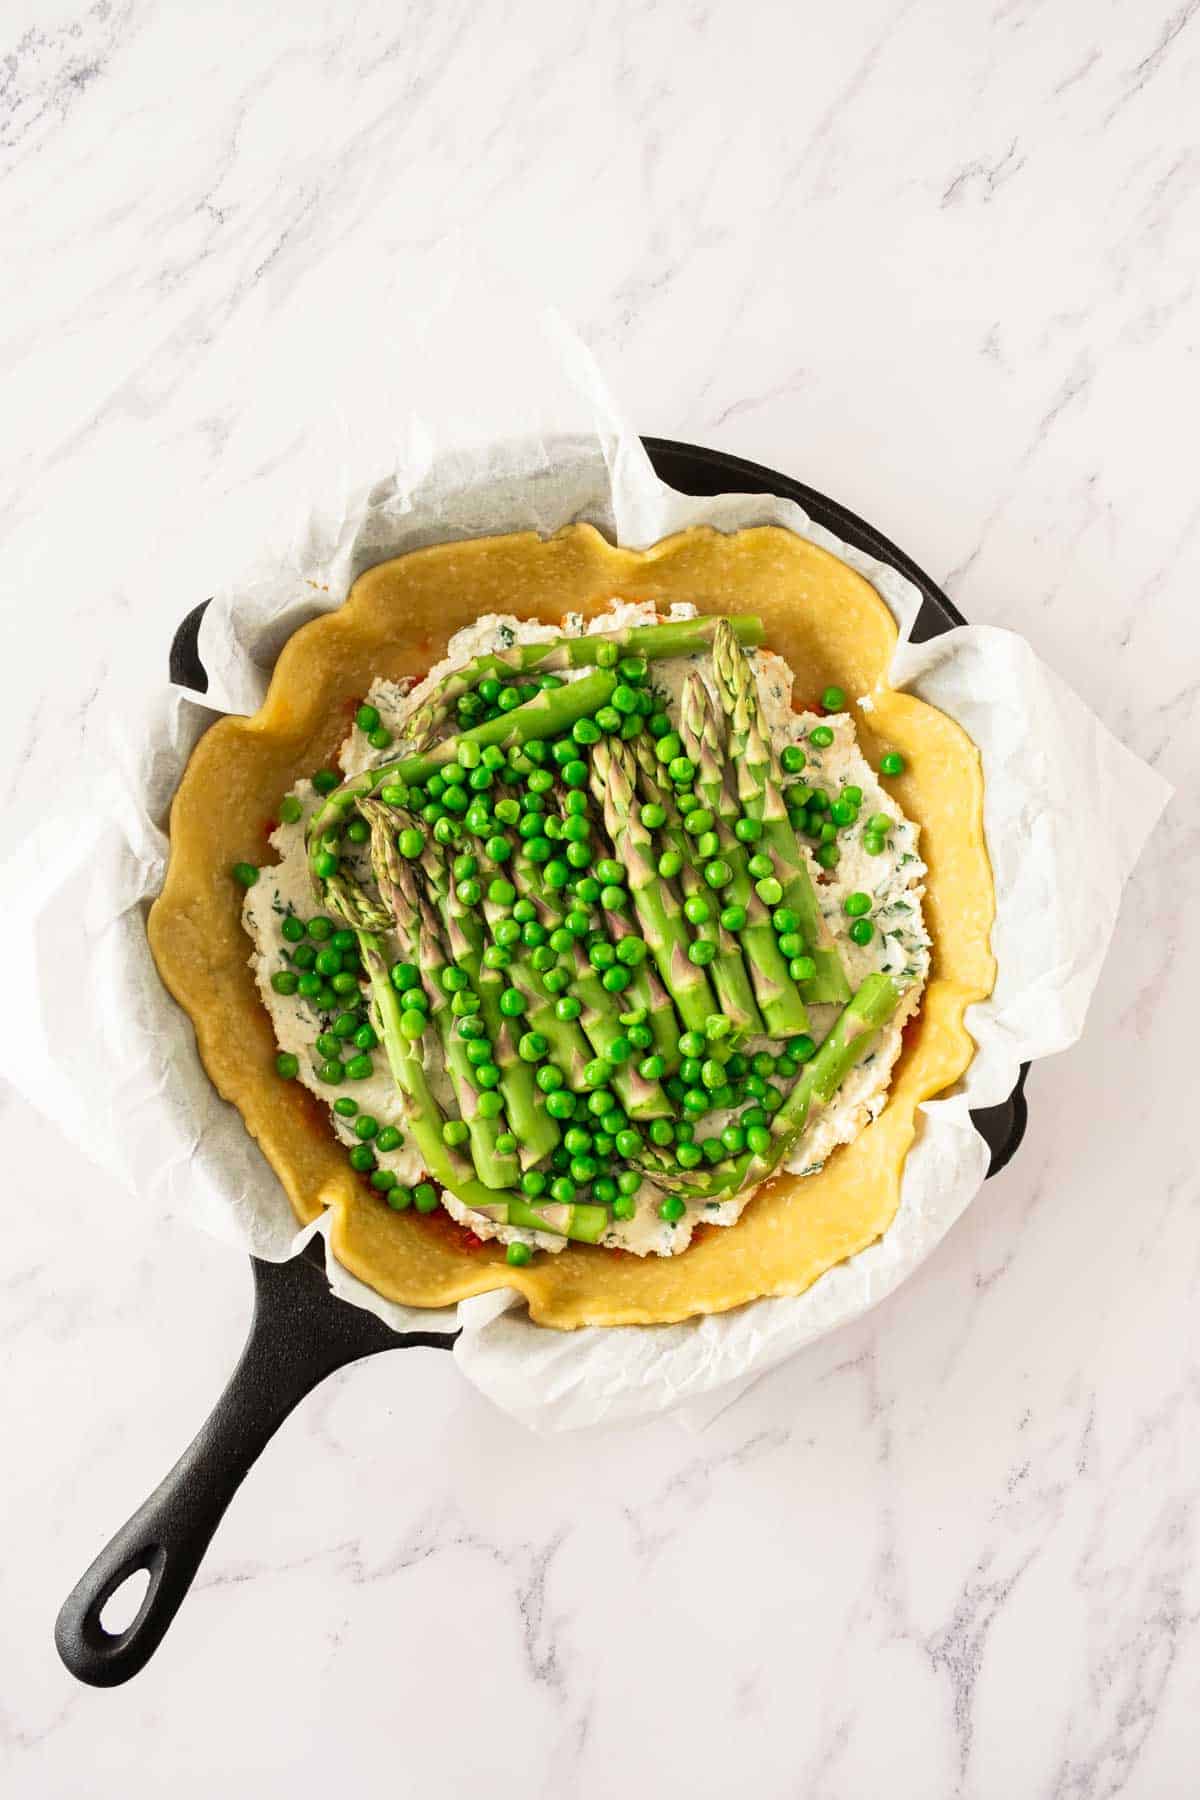 A gelette pastry base in a cast iron pan with asparagus and peas.